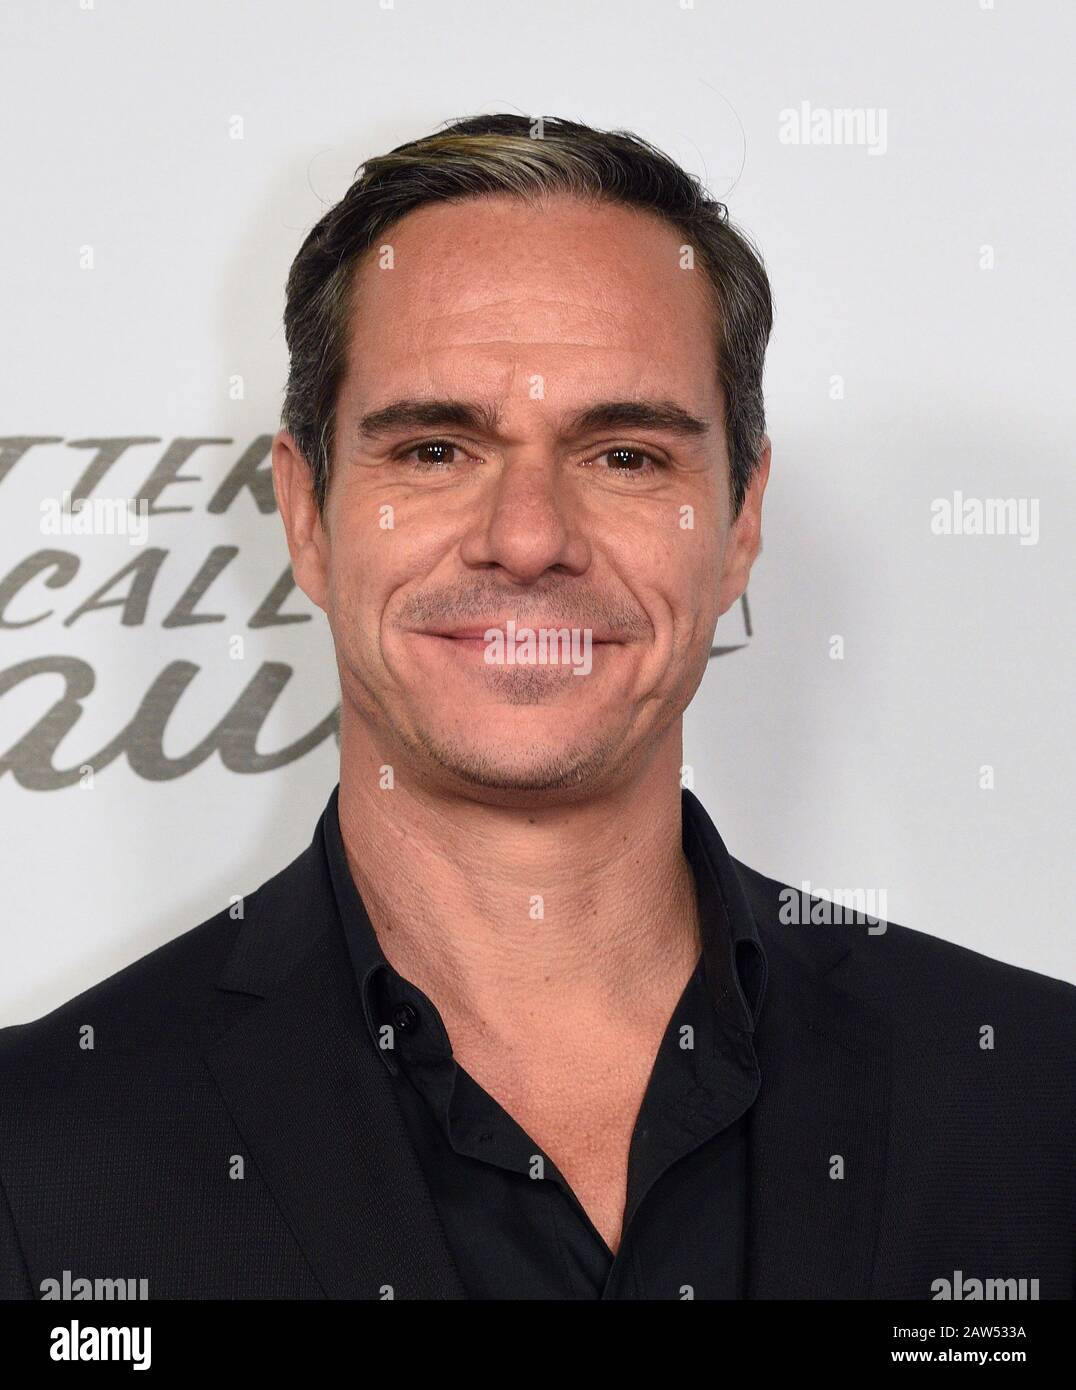 HOLLYWOOD, CALIFORNIA - FEBRUARY 05: Tony Dalton attends the premiere of AMC's 'Better Call Saul' Season 5 at ArcLight Cinemas on February 05, 2020 in Hollywood, California. Photo: Annie Lesser/imageSPACE/MediaPunch Stock Photo